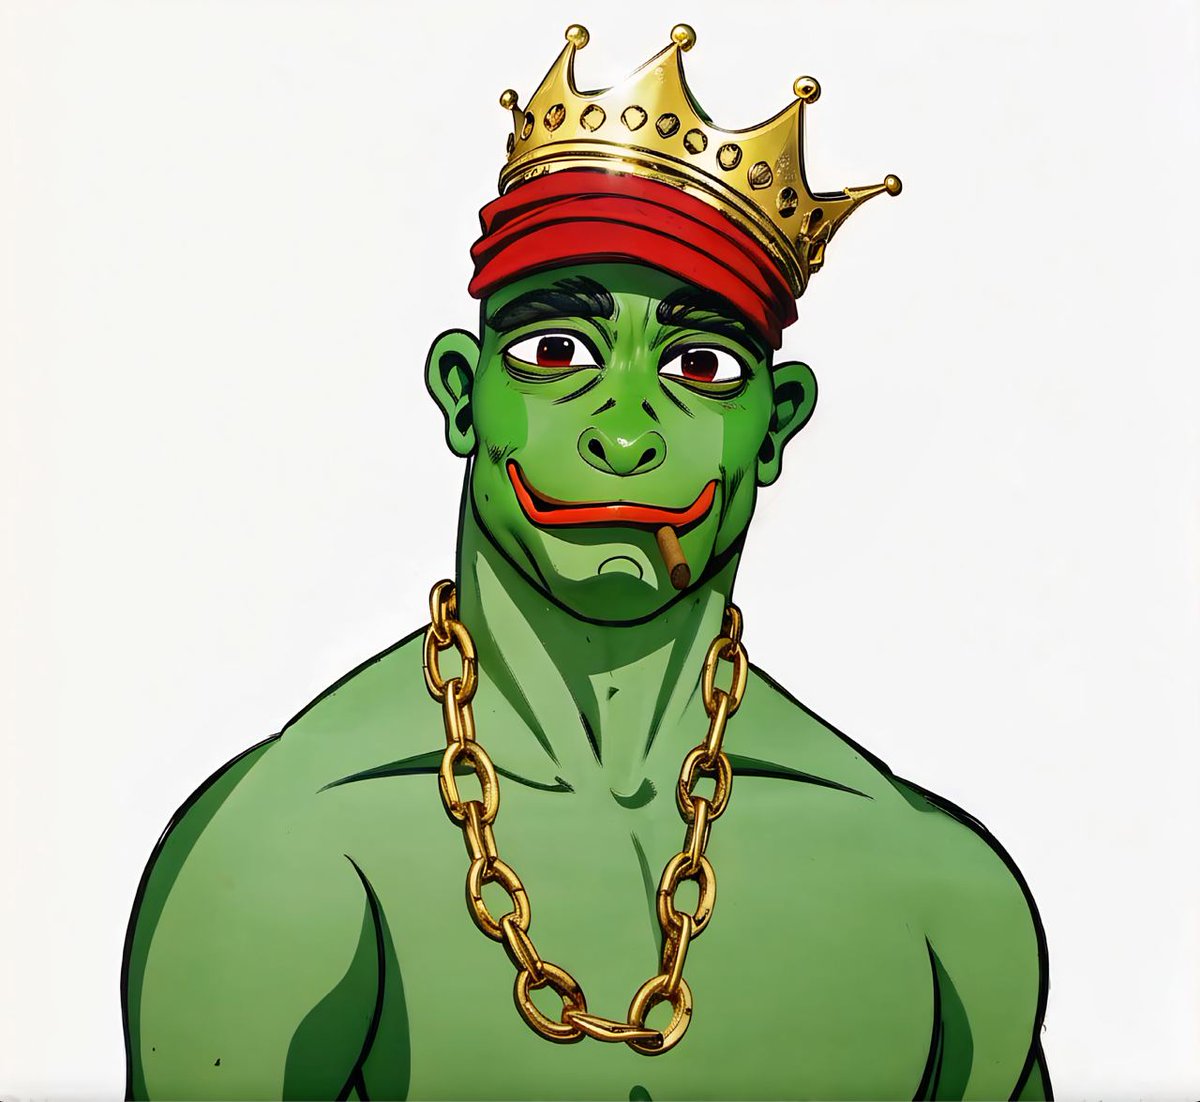 its..230am.. I've been pounding the keyboard pushing @roaringpepe .. gonna sleep now, but tomorrow.. tomorrow is the day! Good night!

$RPEPE is the ticker